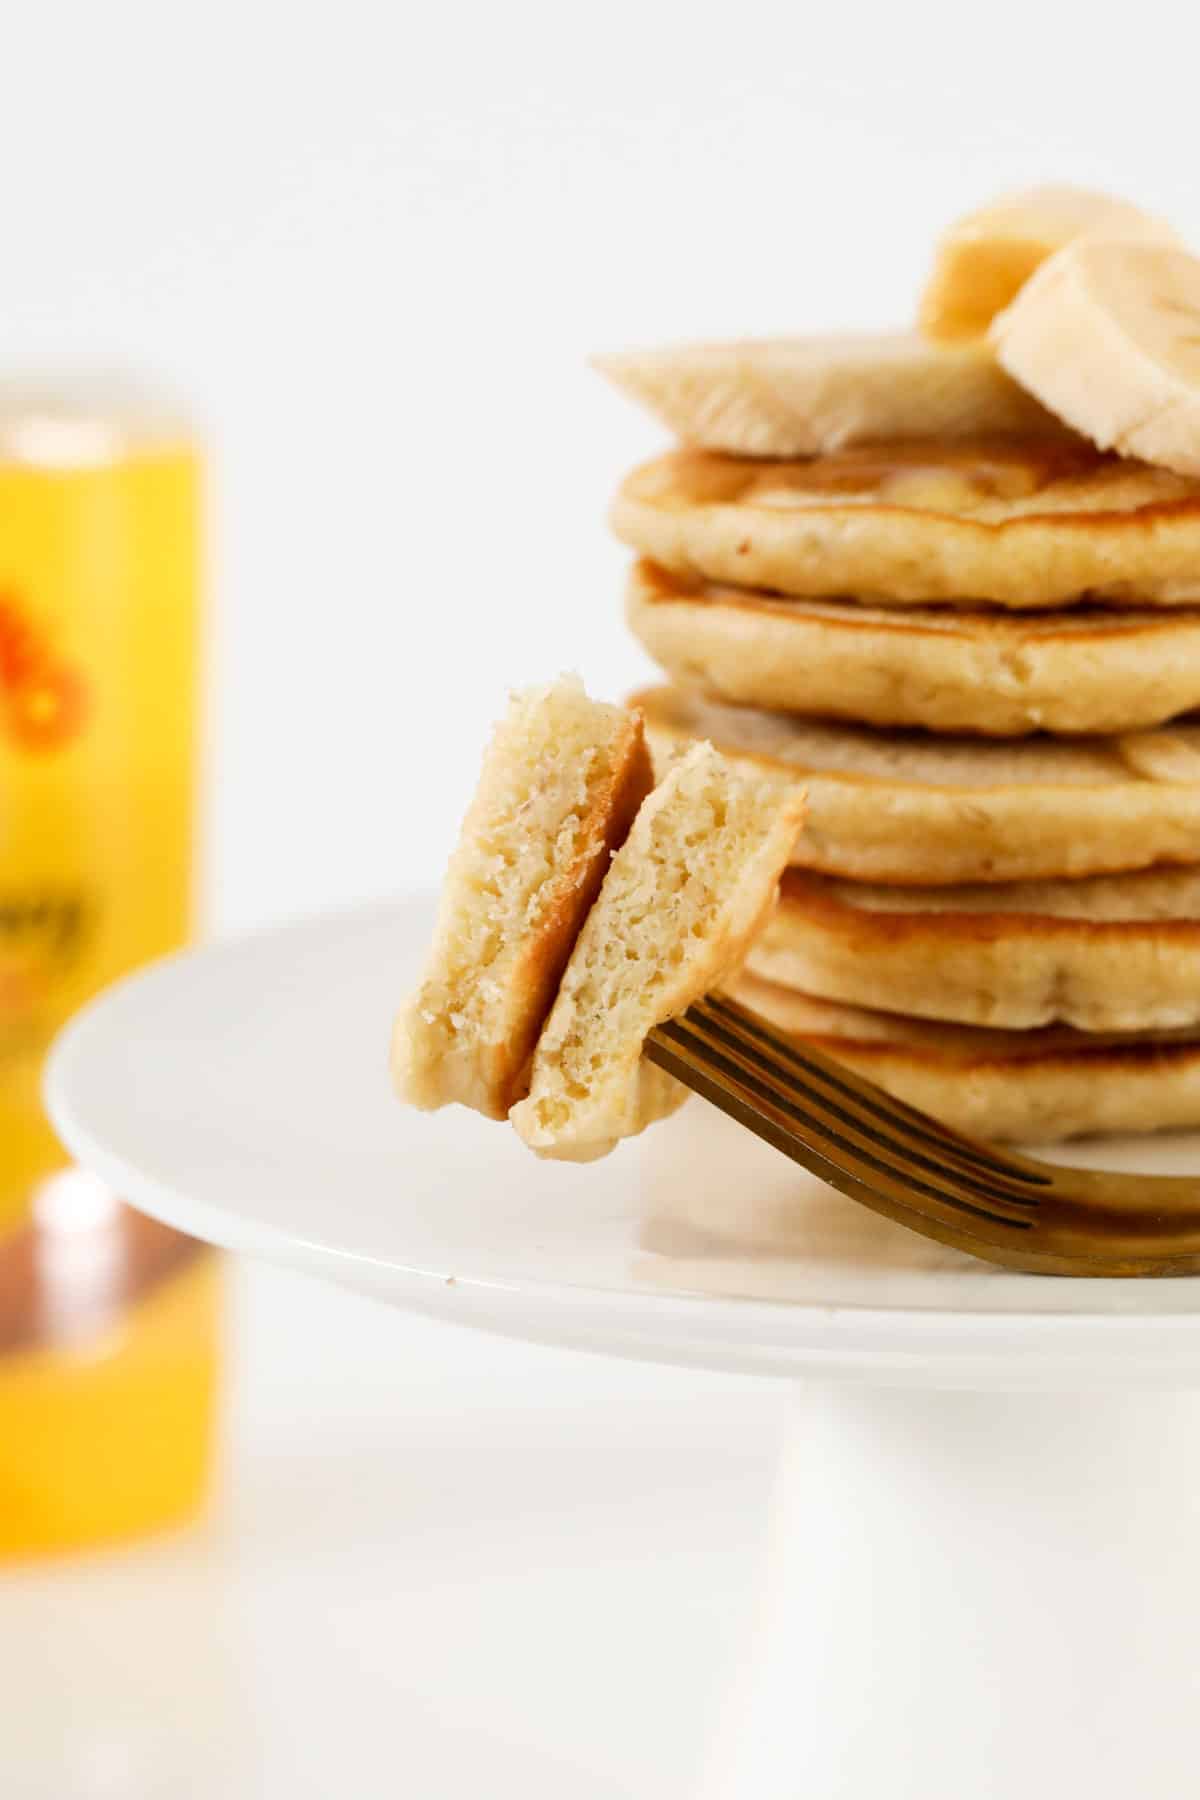 Pieces of fluffy banana pikelets on a fork.